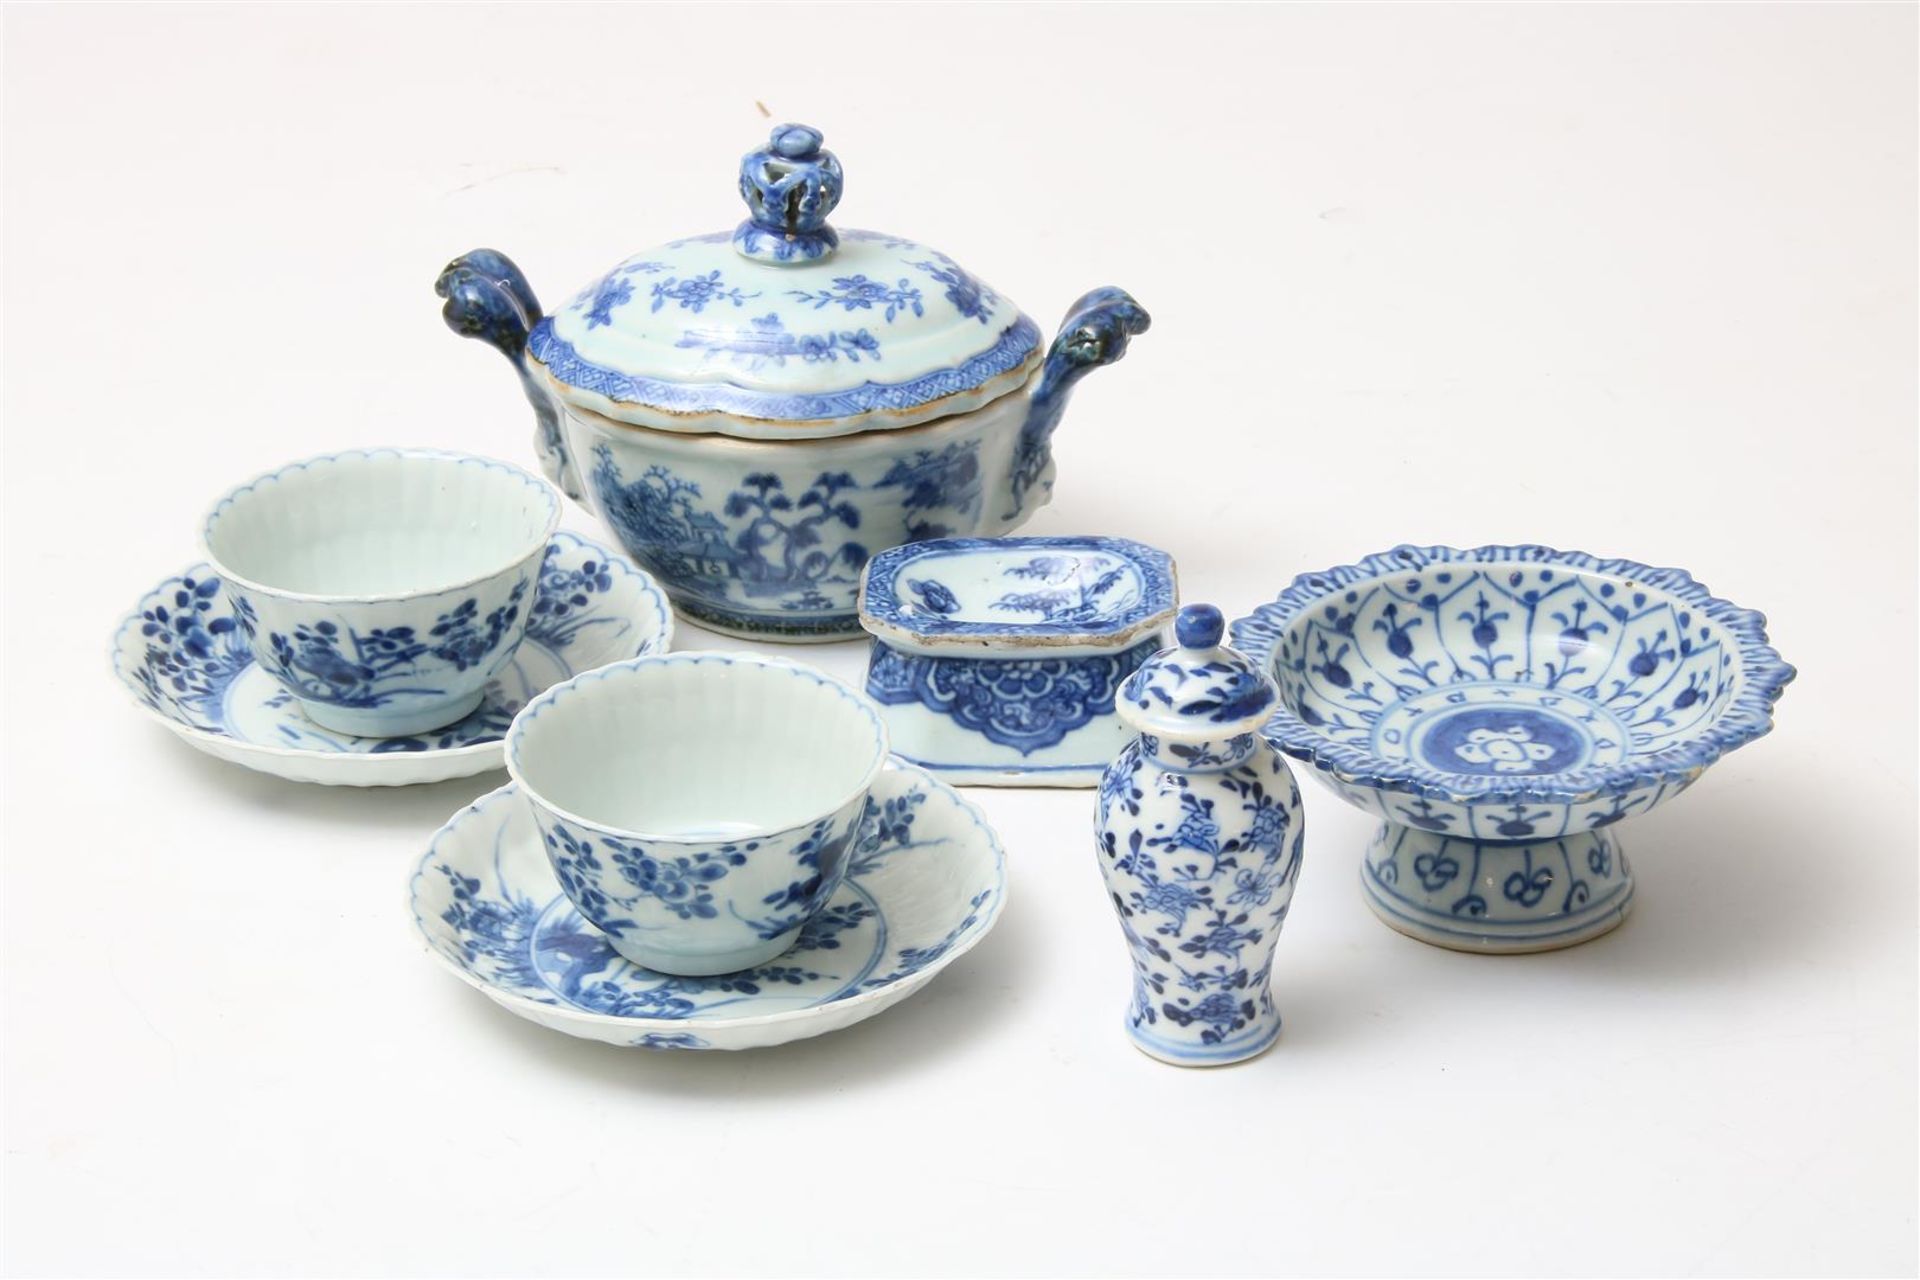 Lot of a pair of Kangxi cups and saucers with decoration of flowering shrubs, (1x saucer with - Image 2 of 6